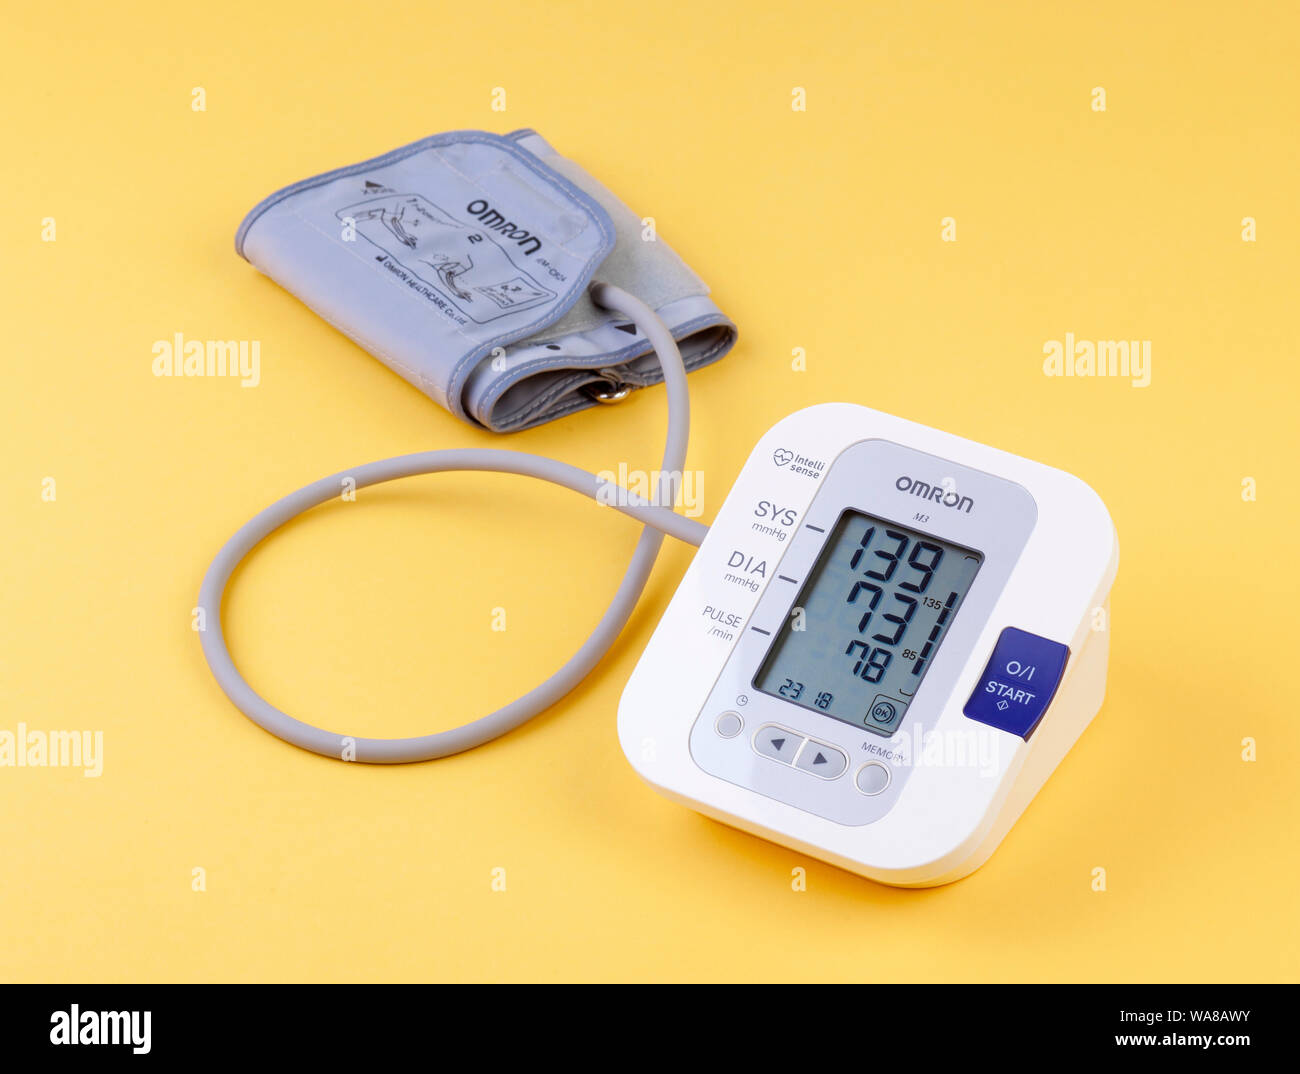 Omron M3 blood pressure and heart rate monitor Stock Photo - Alamy